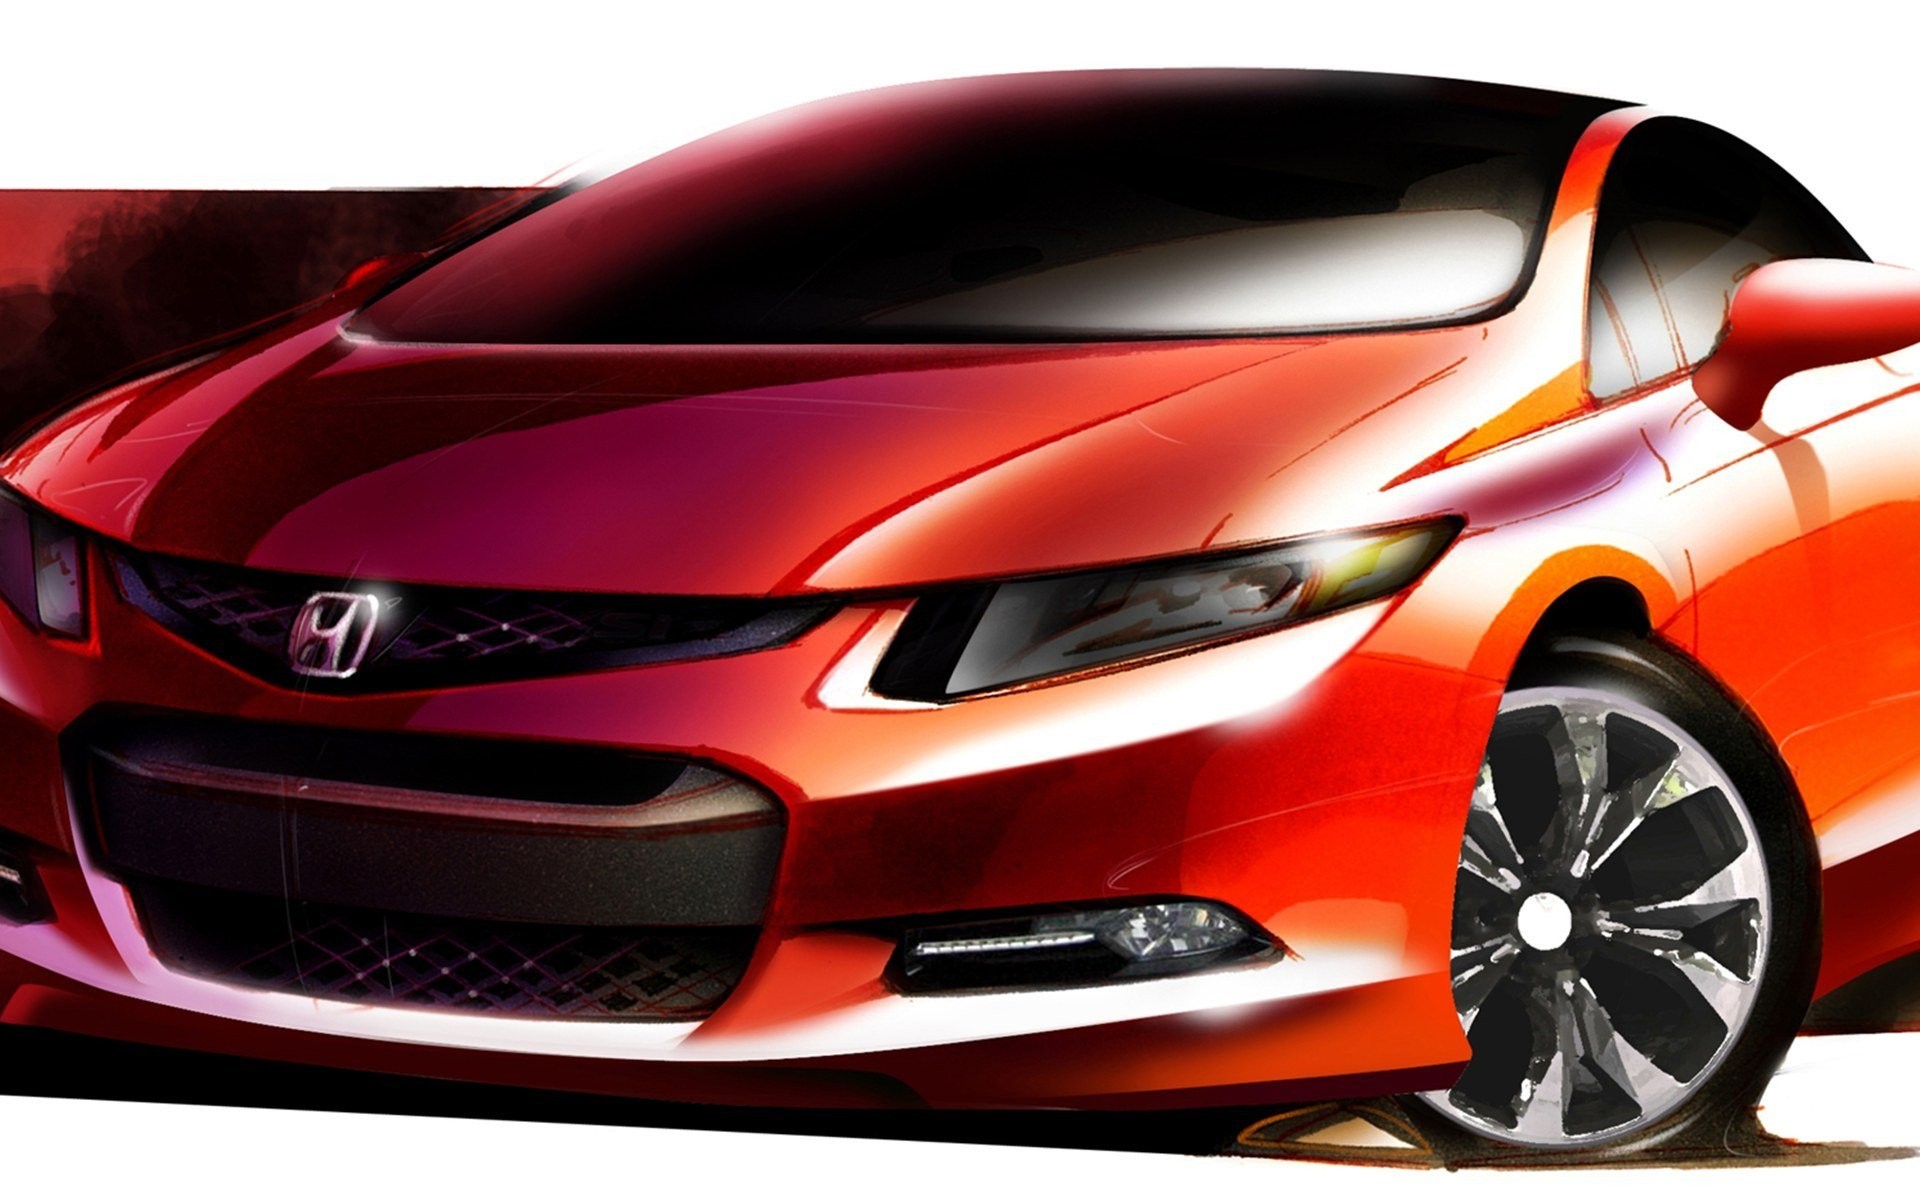 Awesome Honda City Sketch HD Wallpapers - My Site